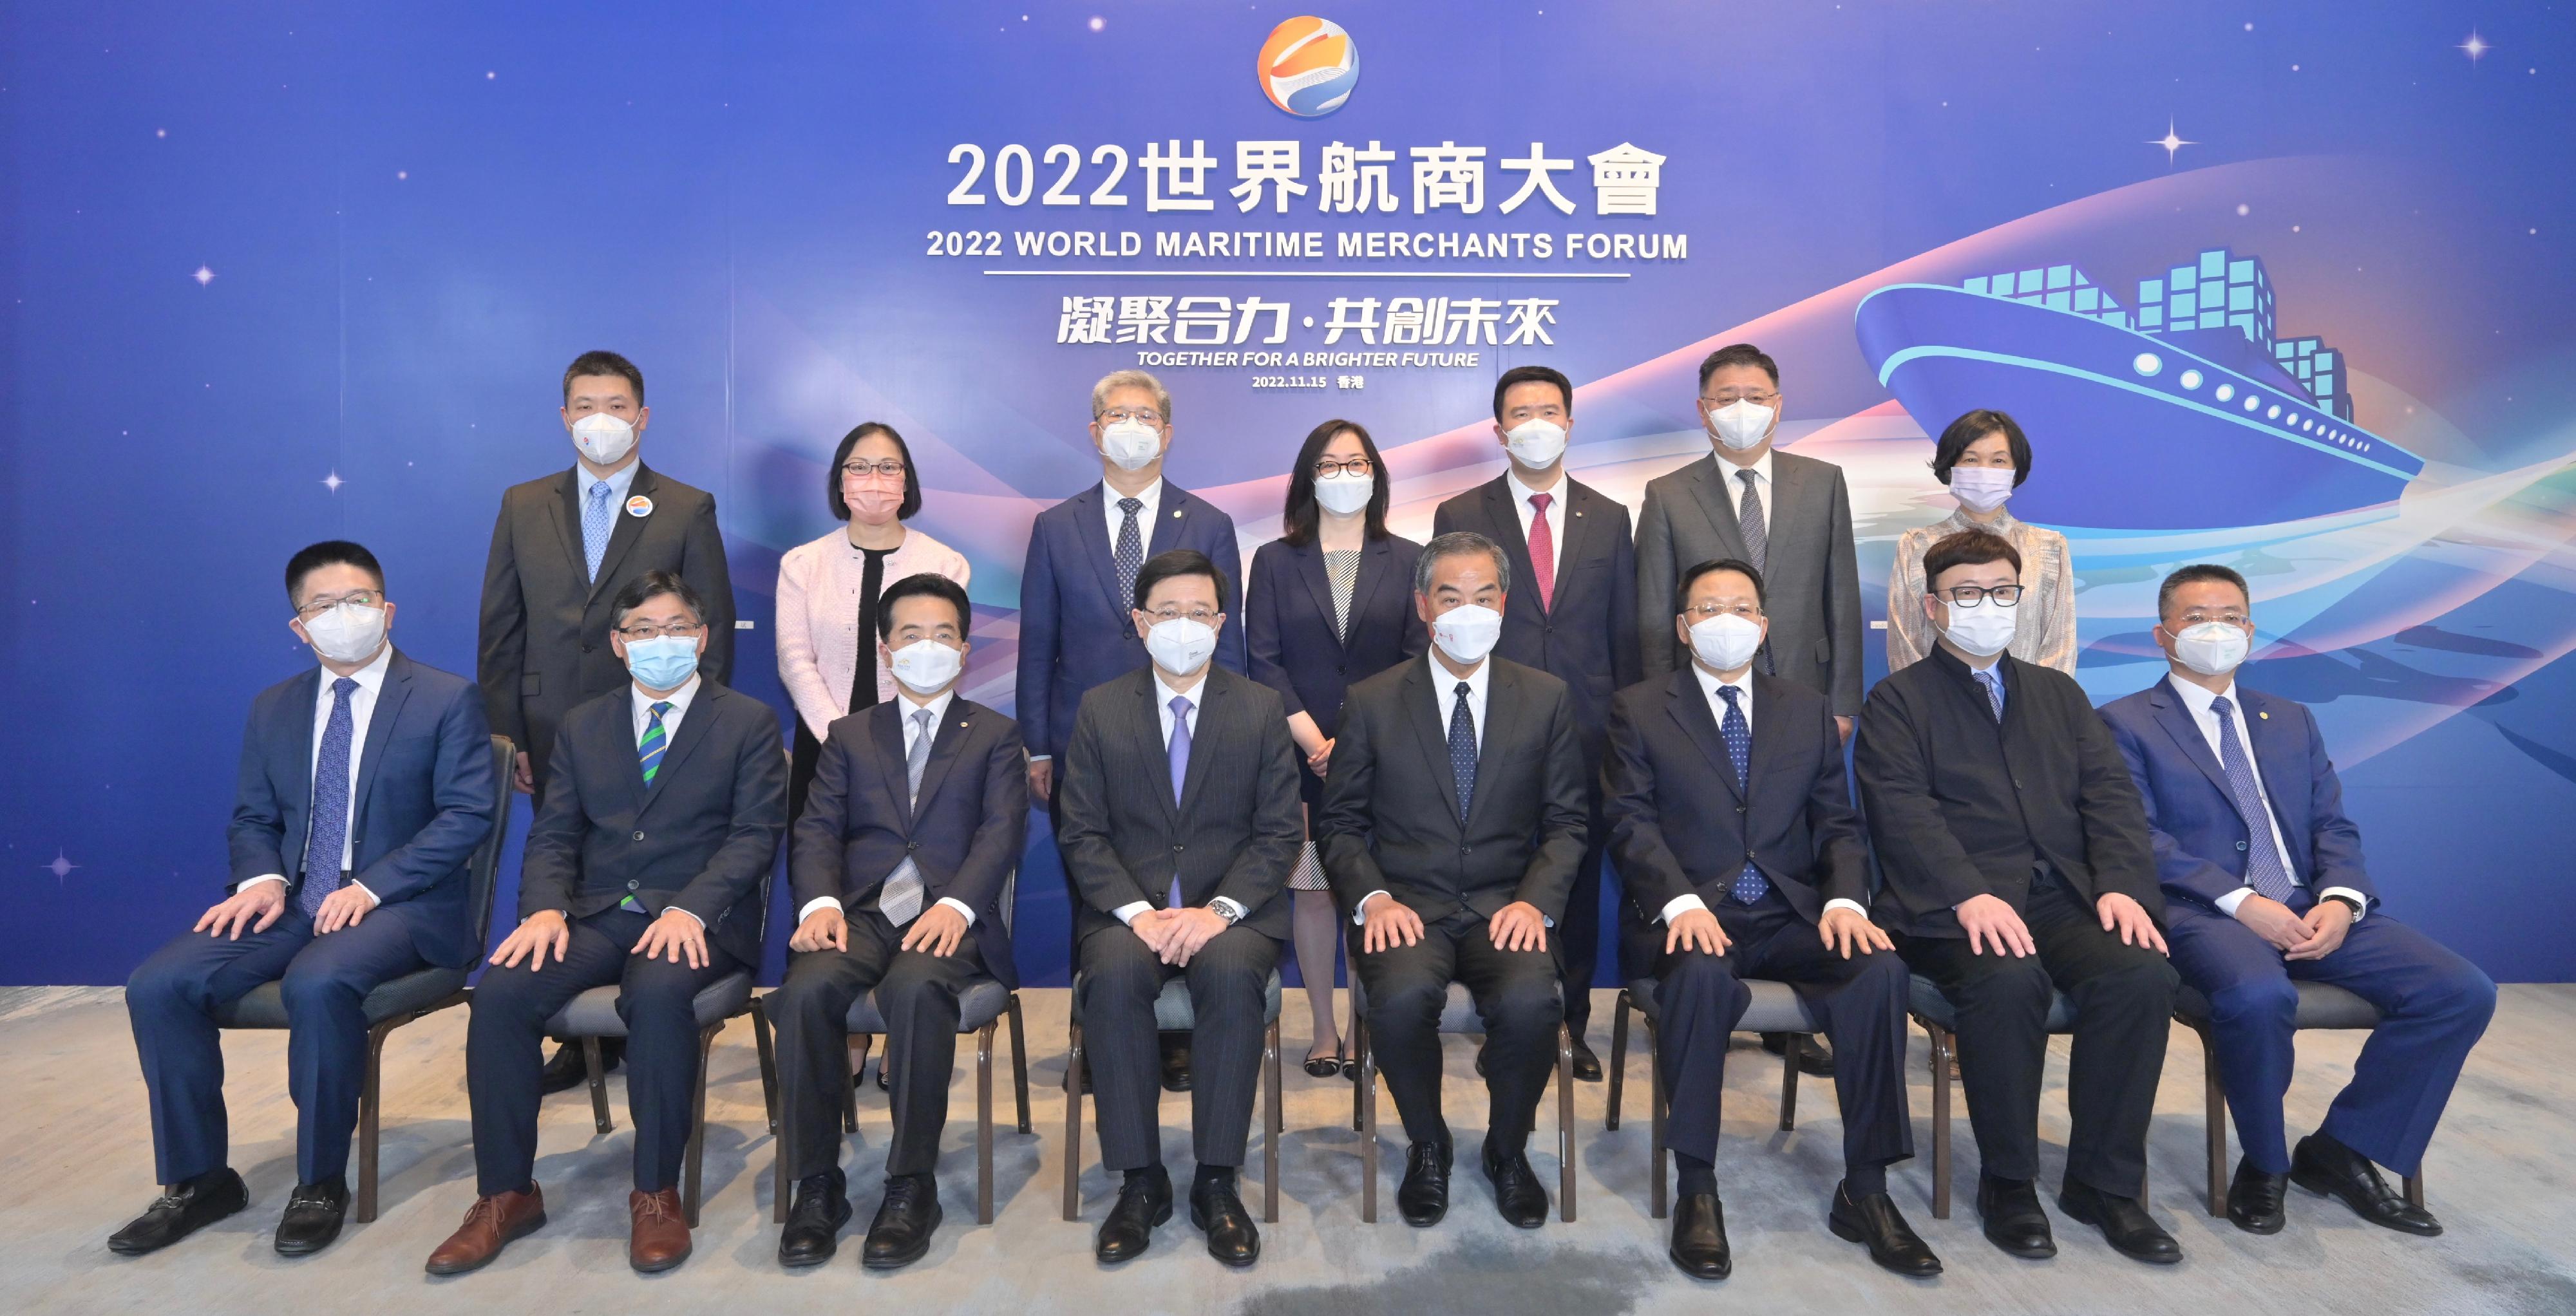 The Chief Executive, Mr John Lee, attended the 2022 World Maritime Merchants Forum today (November 15). Photo shows (first row, from left) the Director-General of the Department of Economic Affairs of the Liaison Office of the Central People's Government (LOCPG) in the Hong Kong Special Administrative Region (HKSAR), Mr Sun Xiangyi; the Secretary for Transport and Logistics, Mr Lam Sai-hung; the Chairman of the China Merchants Group, Mr Miao Jianmin; Mr Lee; Vice-Chairman of the National Committee of the Chinese People's Political Consultative Conference Mr C Y Leung; Deputy Director of the LOCPG in the HKSAR Mr Yin Zonghua; the Chairman of the Hong Kong Shipowners Association, Mr Wellington Koo; Executive Vice President of the China Merchants Group Mr Feng Boming and other guests. 